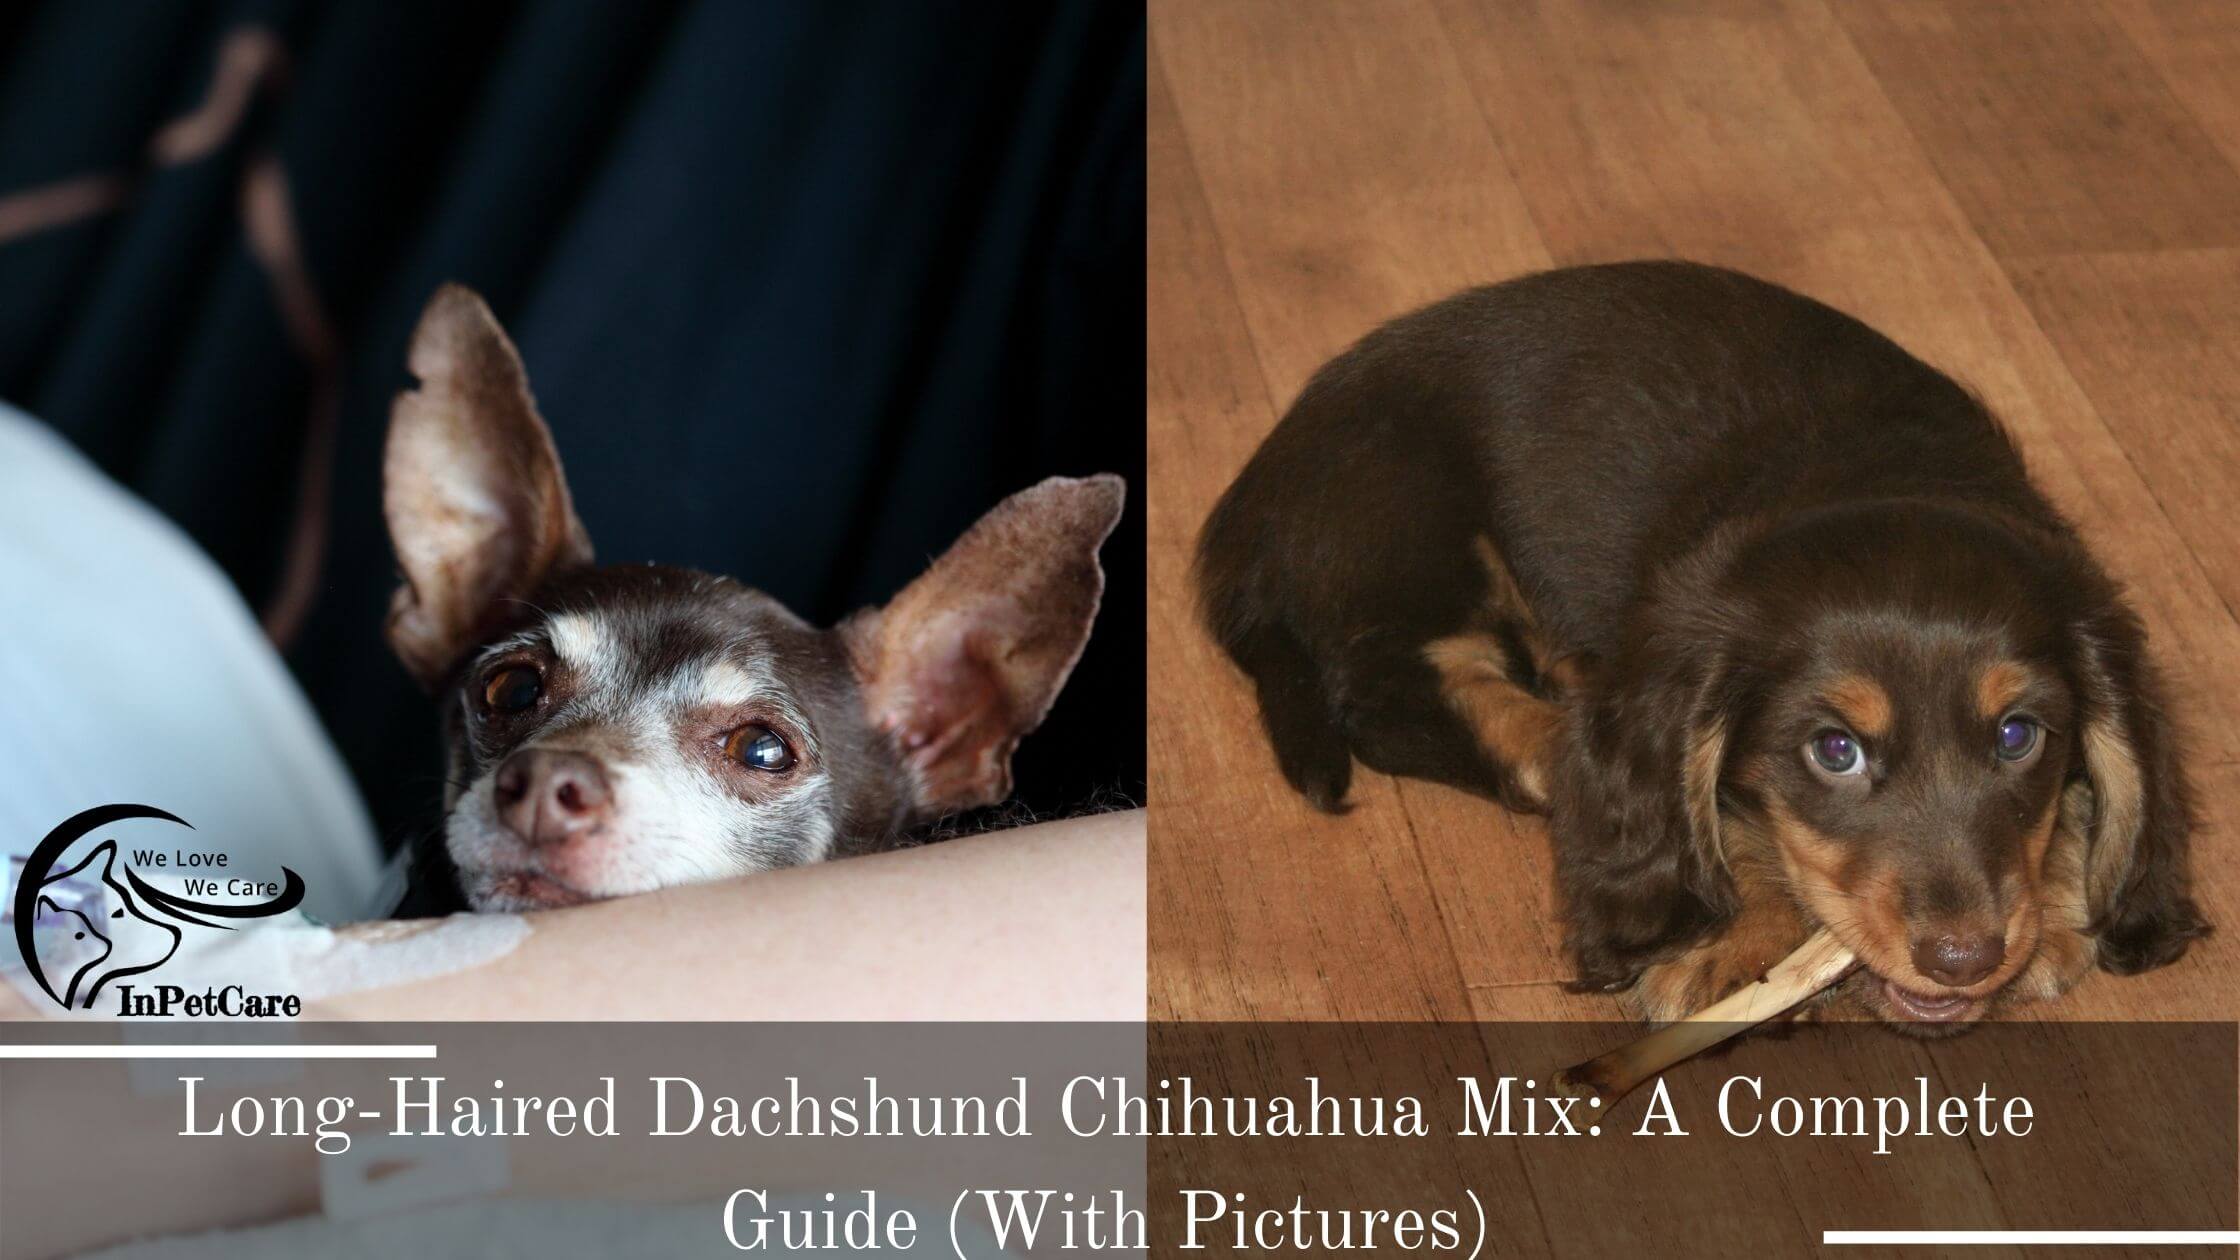 Long-Haired Dachshund Chihuahua Mix: A Complete Guide (With Pictures)